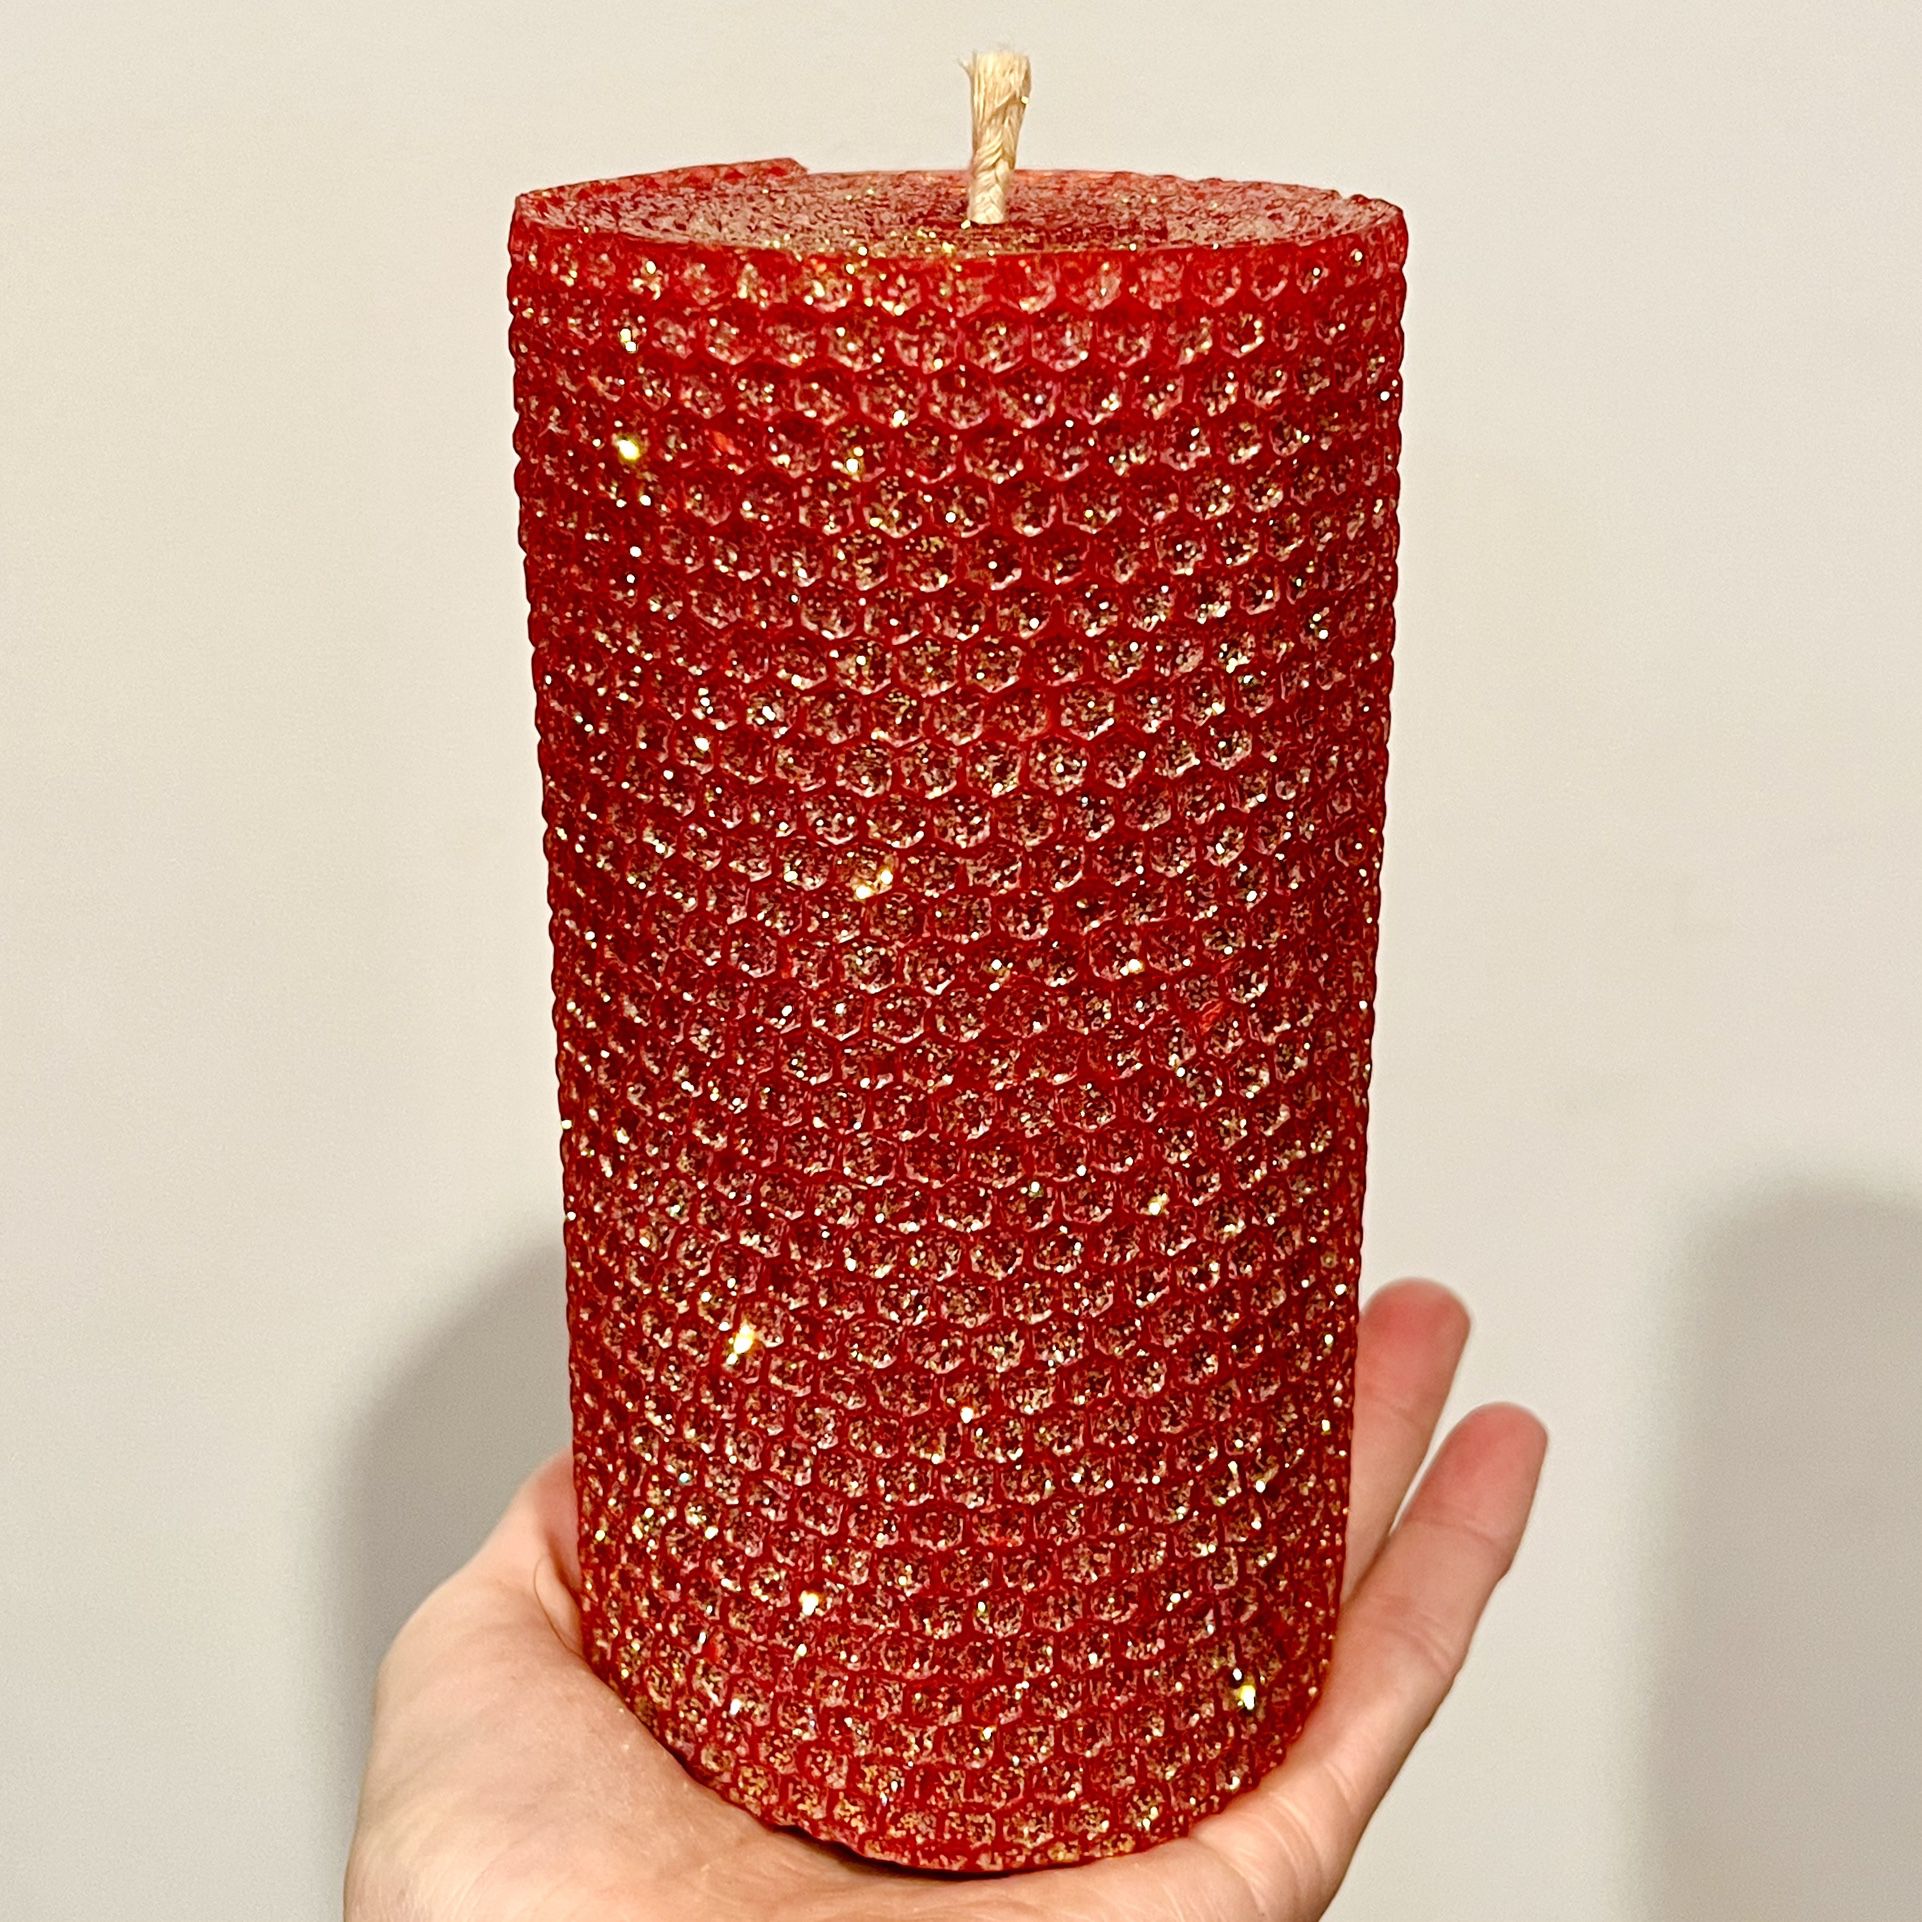 Hand Rolled Glitter Beeswax Pillar Candle + Holder, Never Burned, 6” x 3”